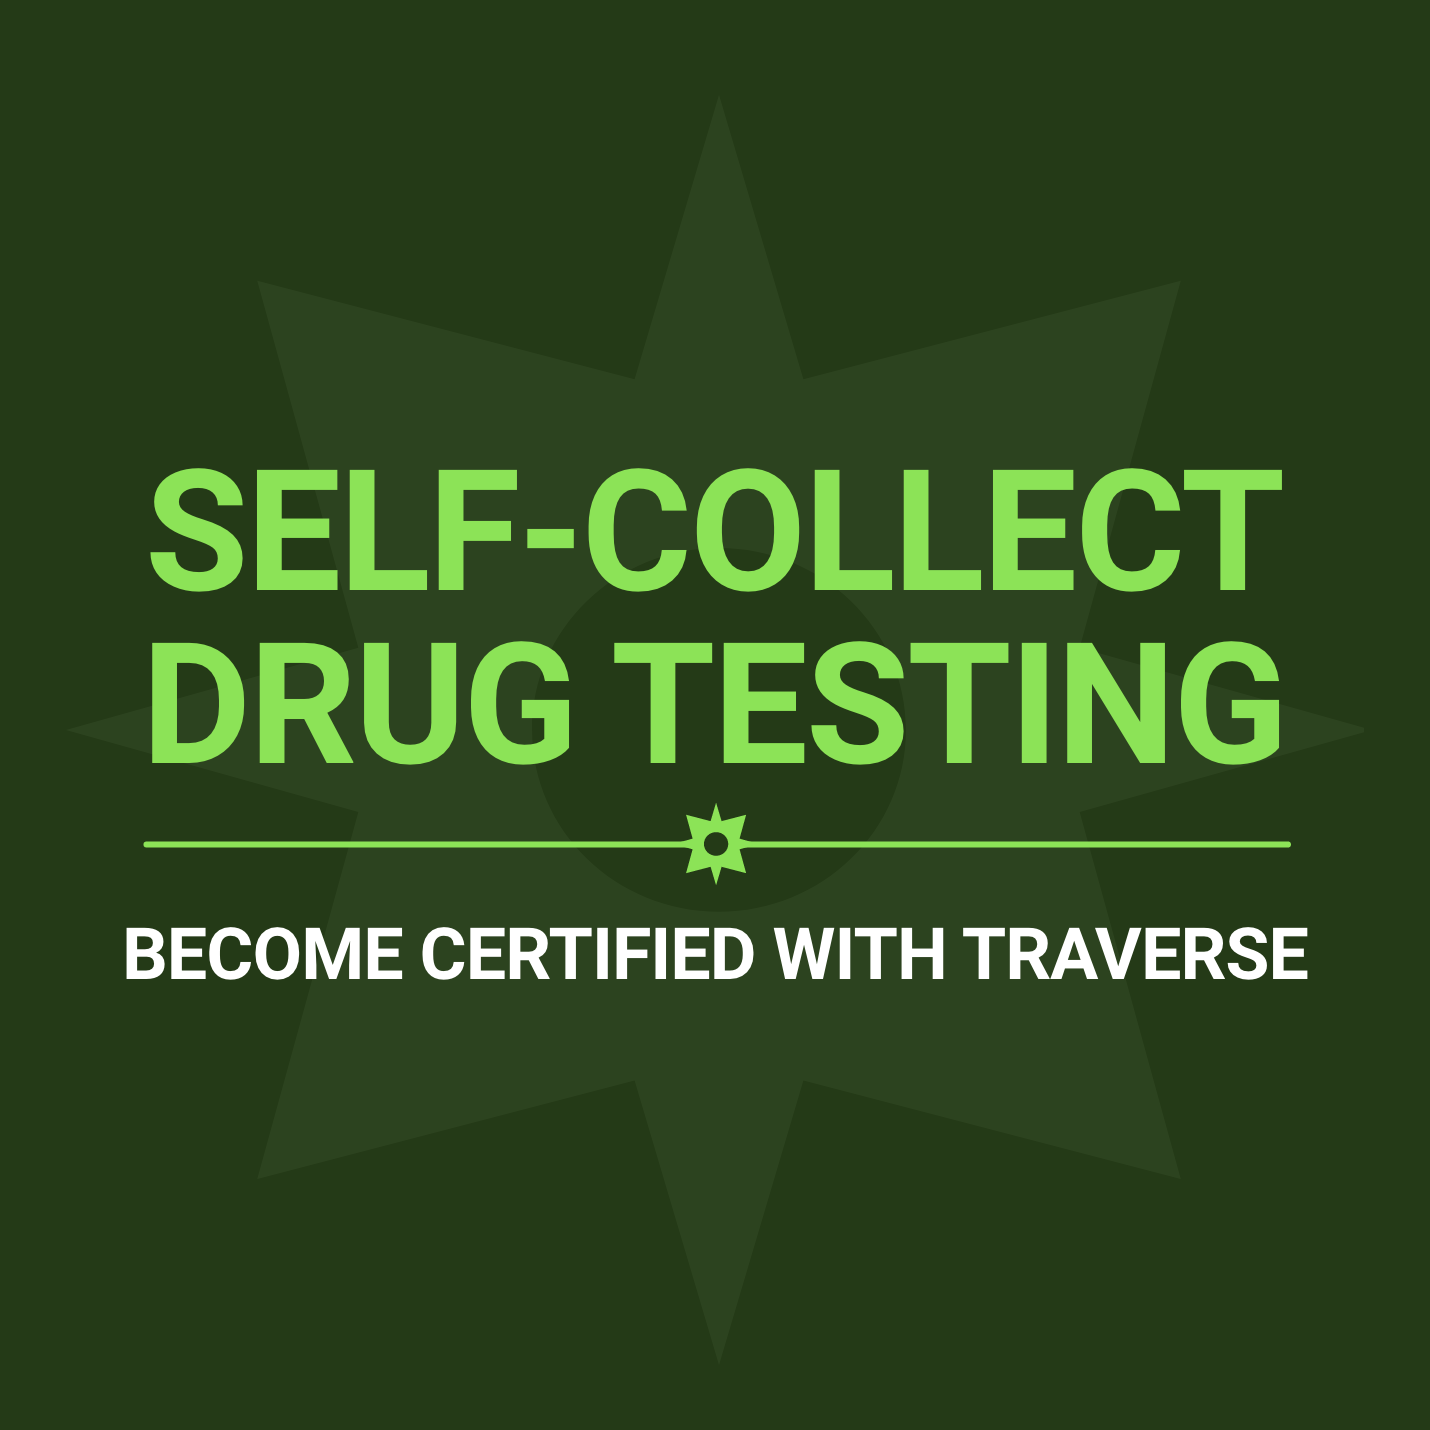 DOT Self-Collect Qualification Is Easier Through Traverse